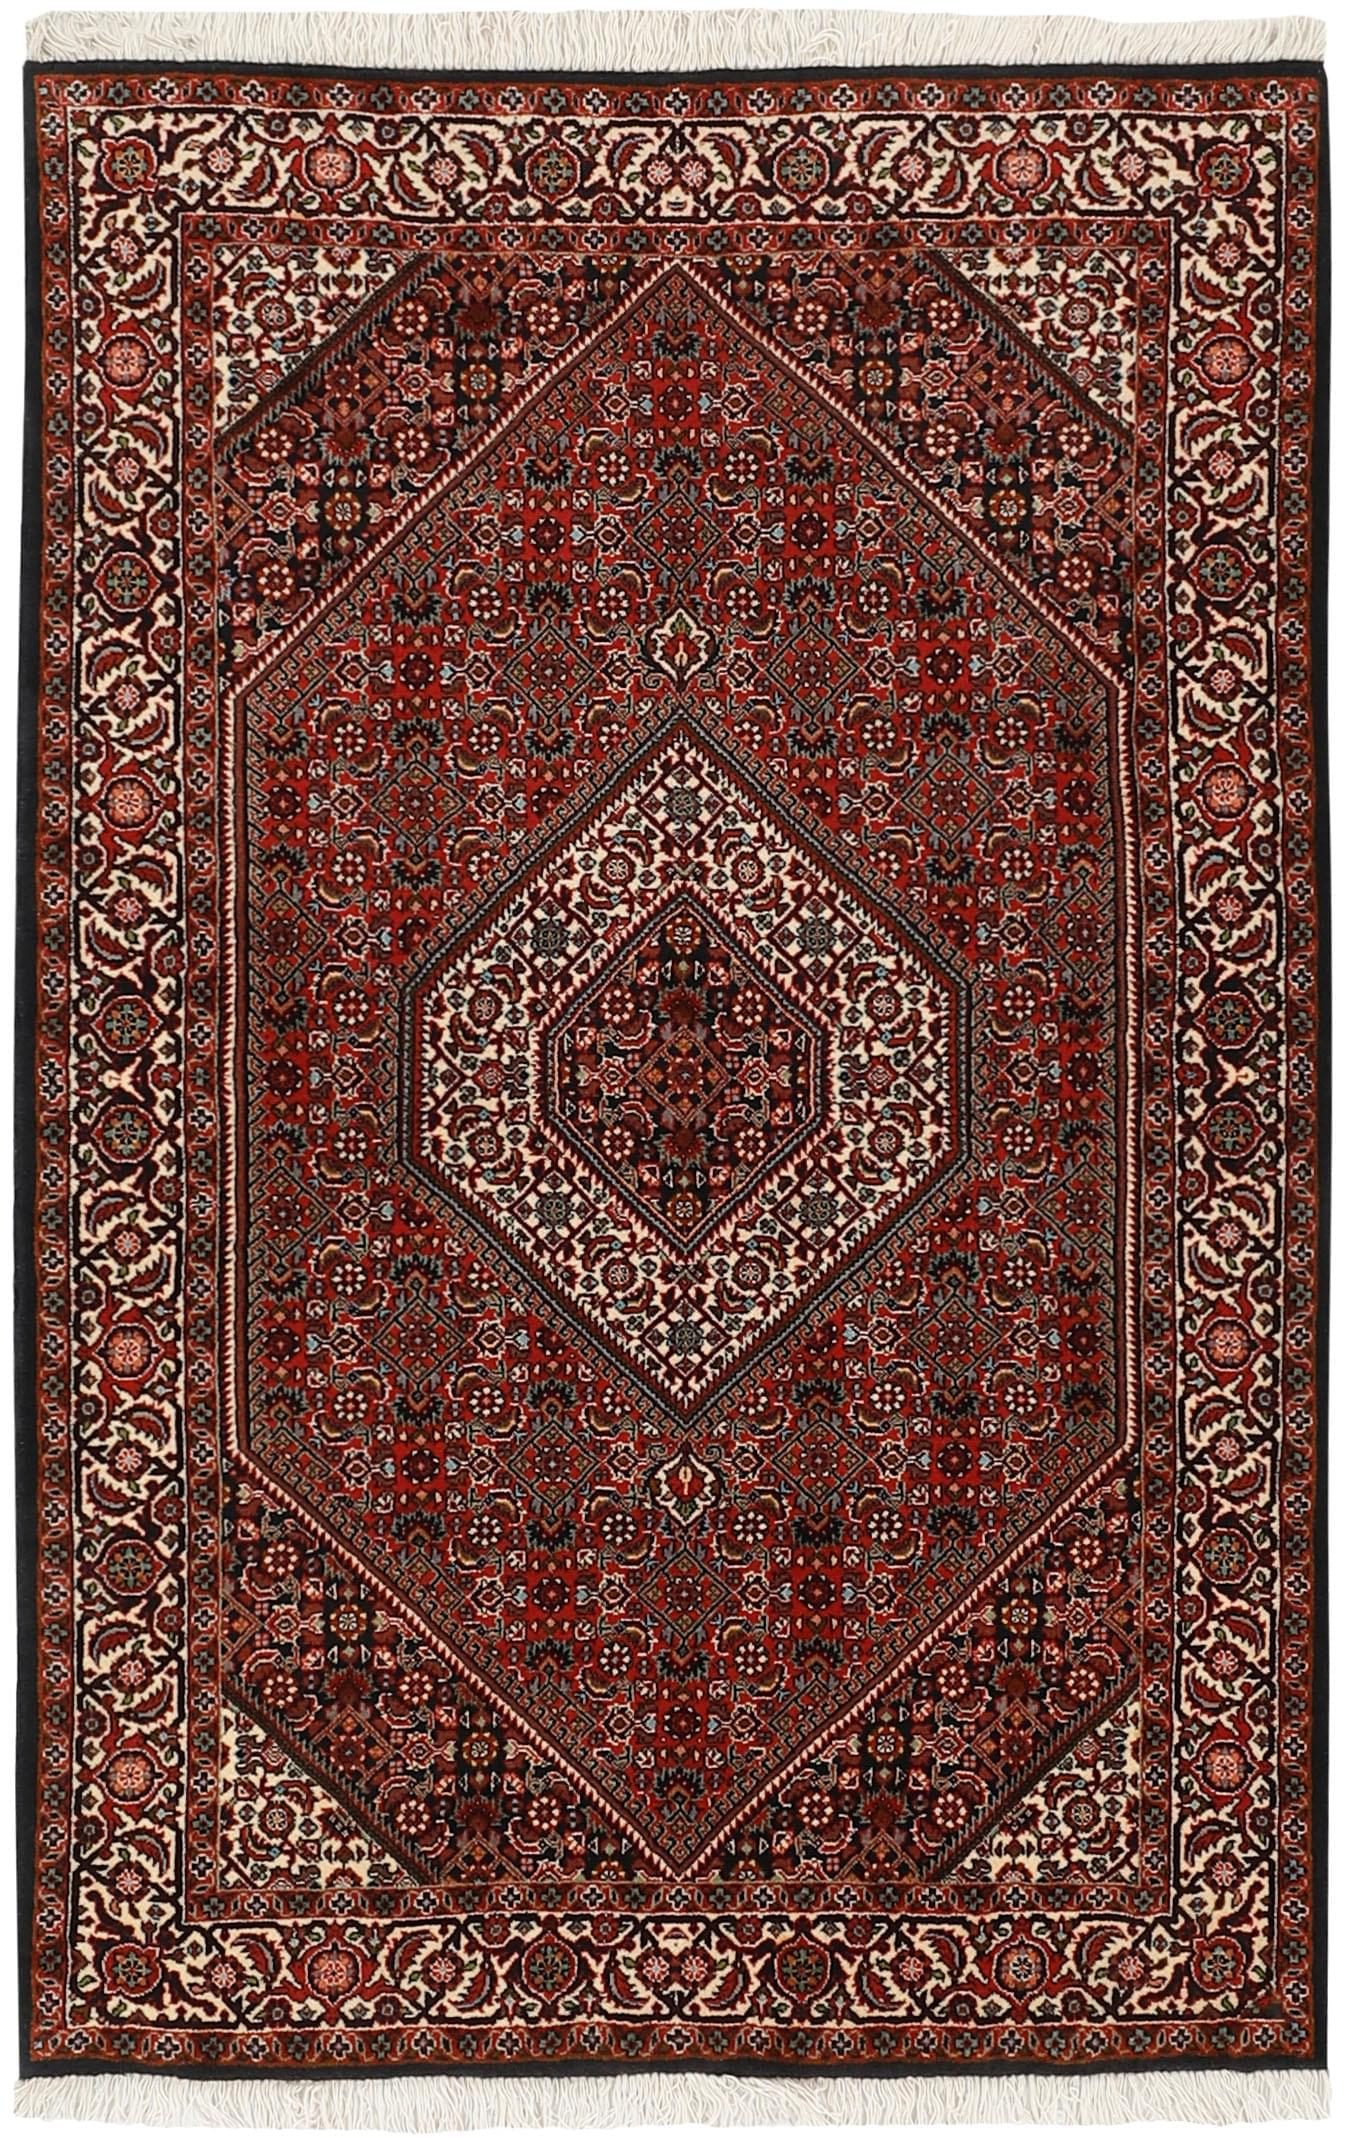 red and cream persian rug with traditional floral design